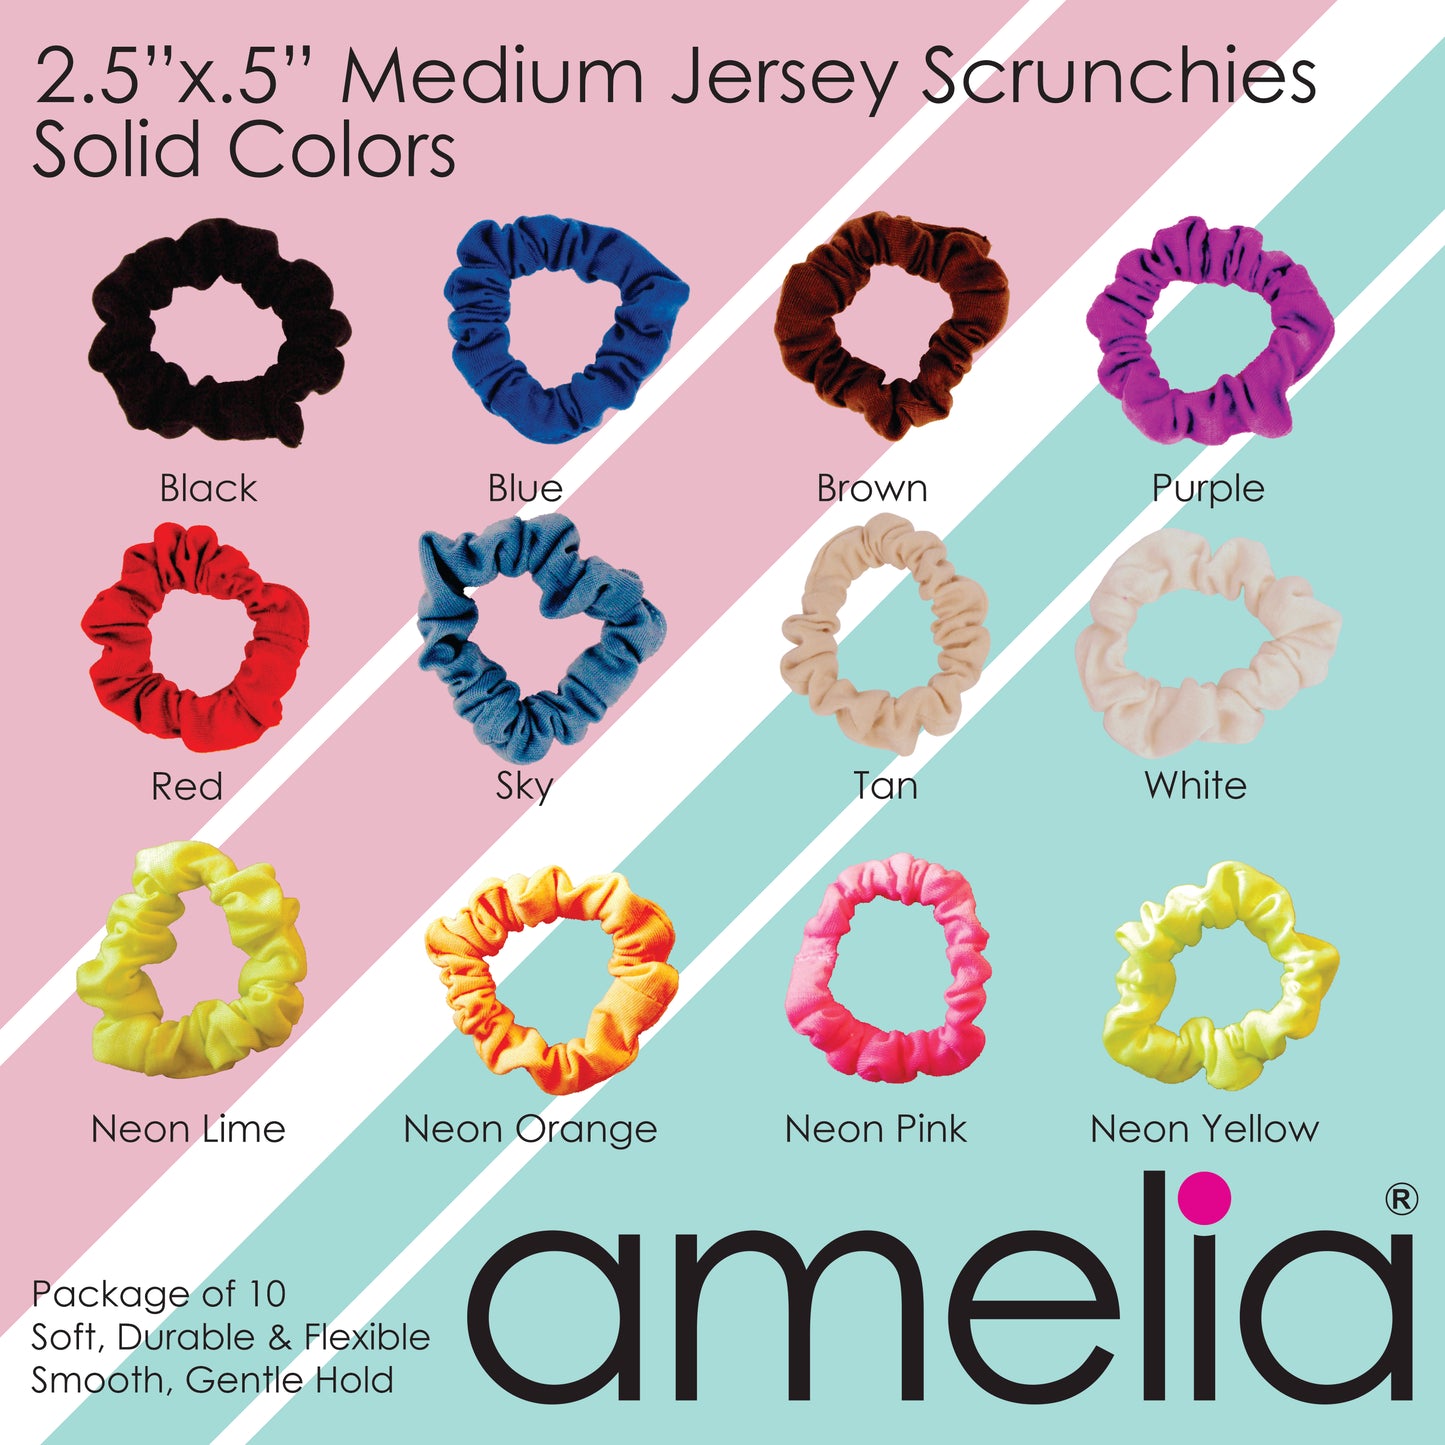 Amelia Beauty, Medium Neon Jersey Scrunchies, 2.5in Diameter, Gentle on Hair, Strong Hold, No Snag, No Dents or Creases. 10 Pack